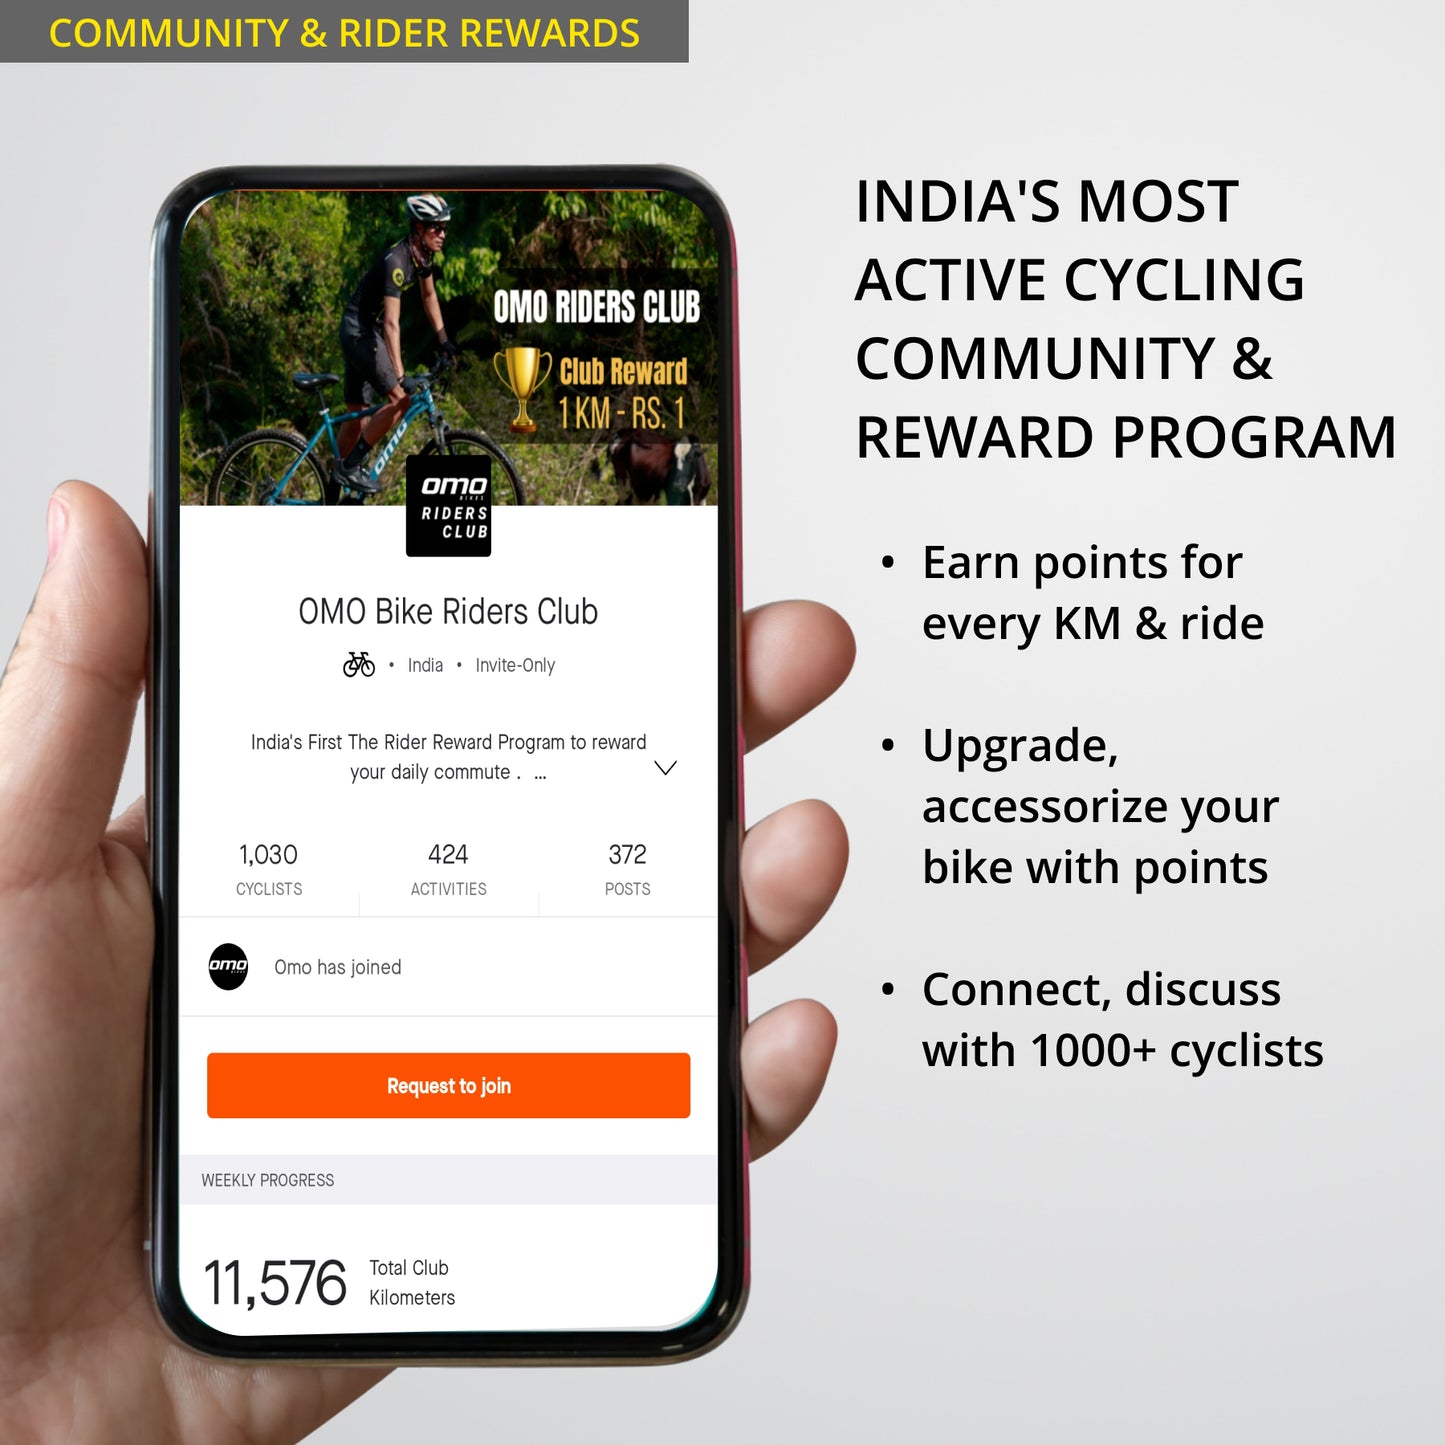 join omo bikes rider club india with omo manali geared MTB to win rewards to upgrade bike and get accessories